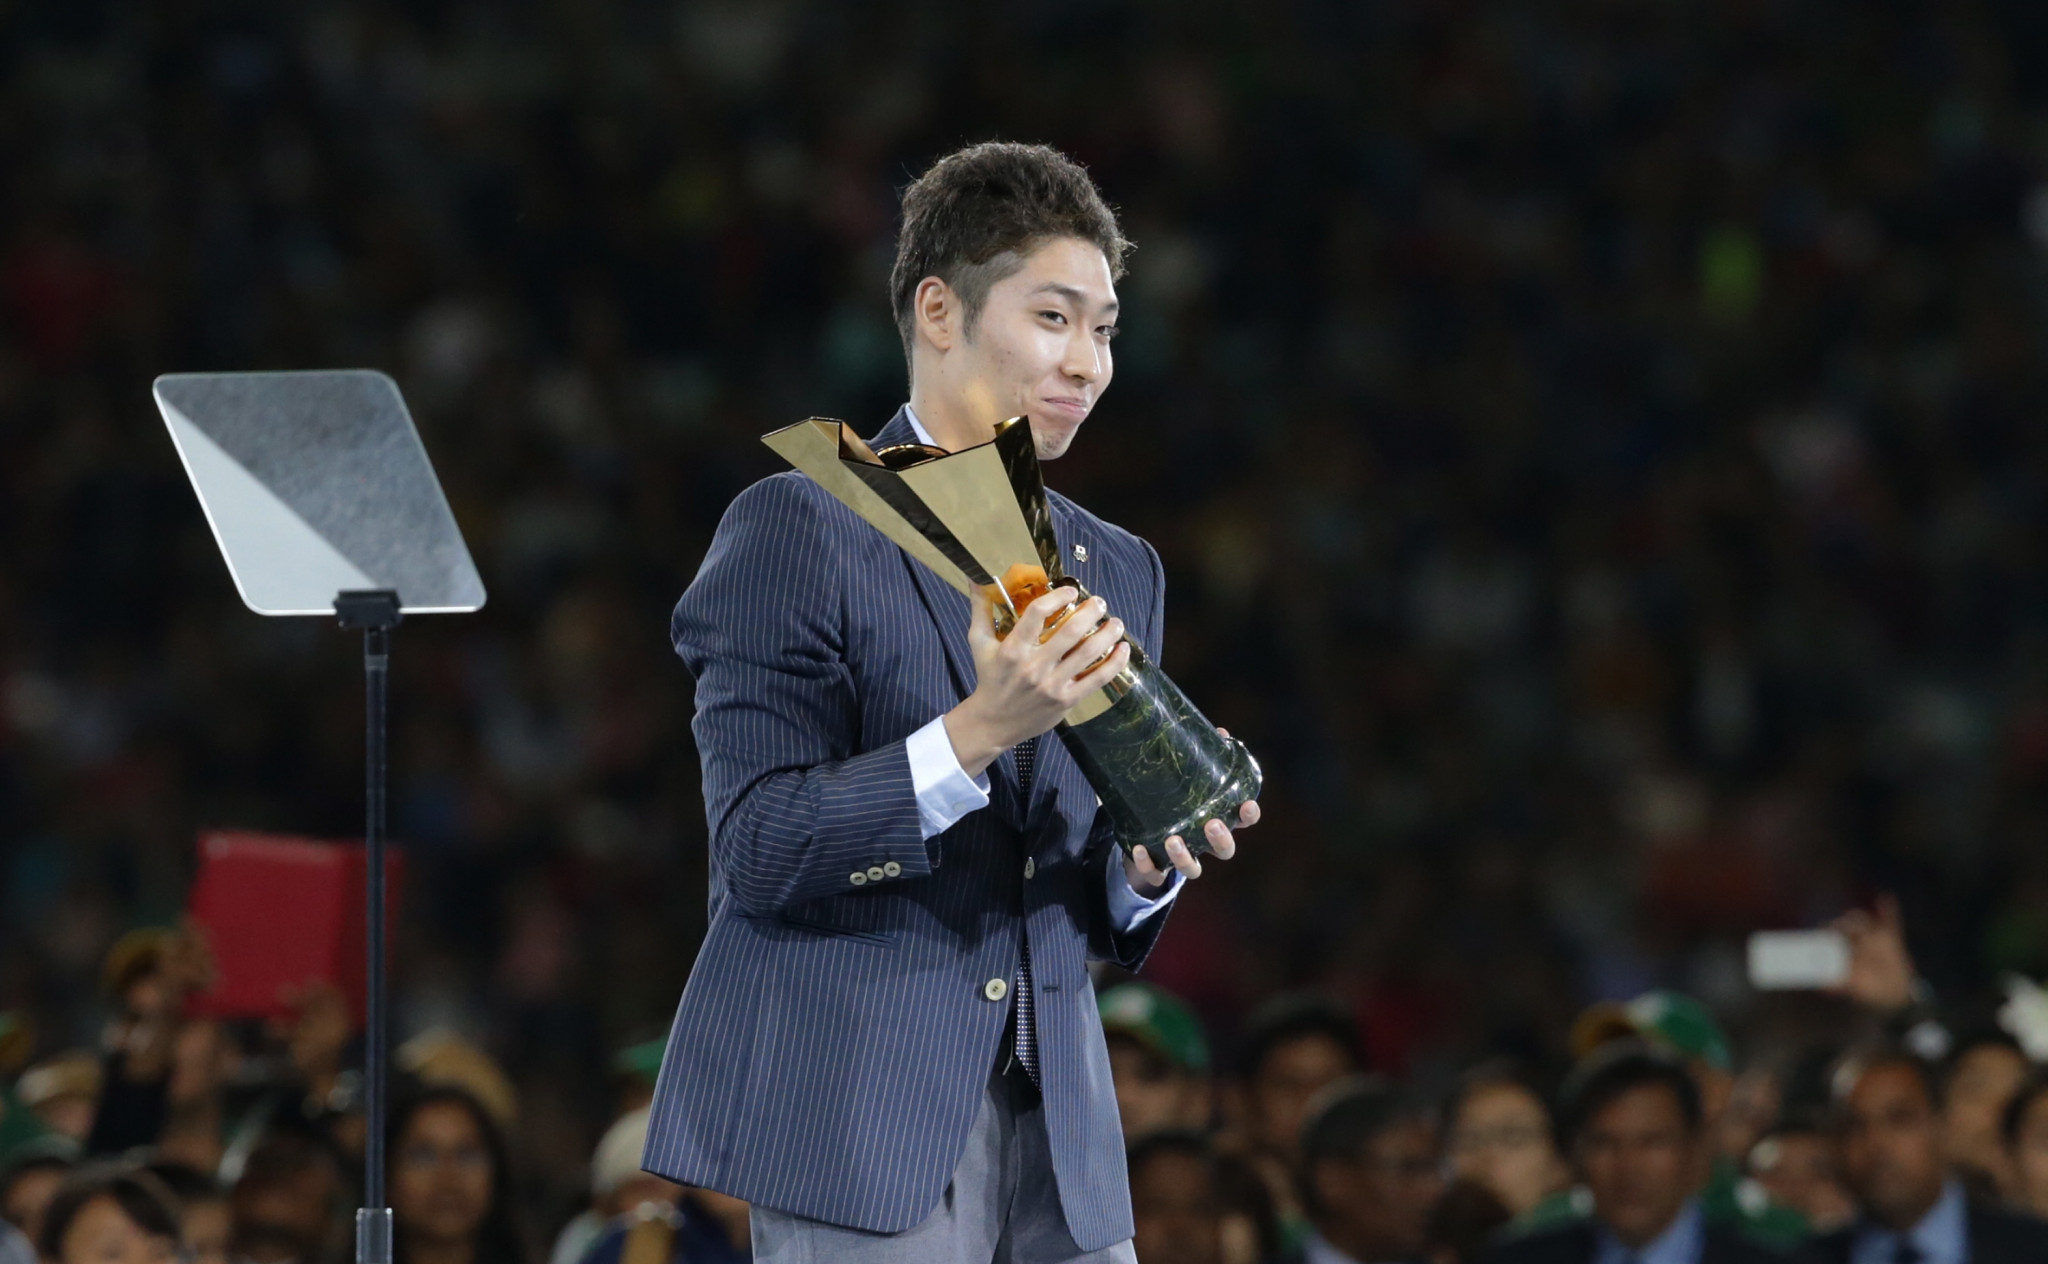 The Olympic Council of Asia has announced it will continue the tradition of the Asian Games Most Valuable Player award, which was last won by swimmer Kosuke Hagino in 2014 ©Getty Images